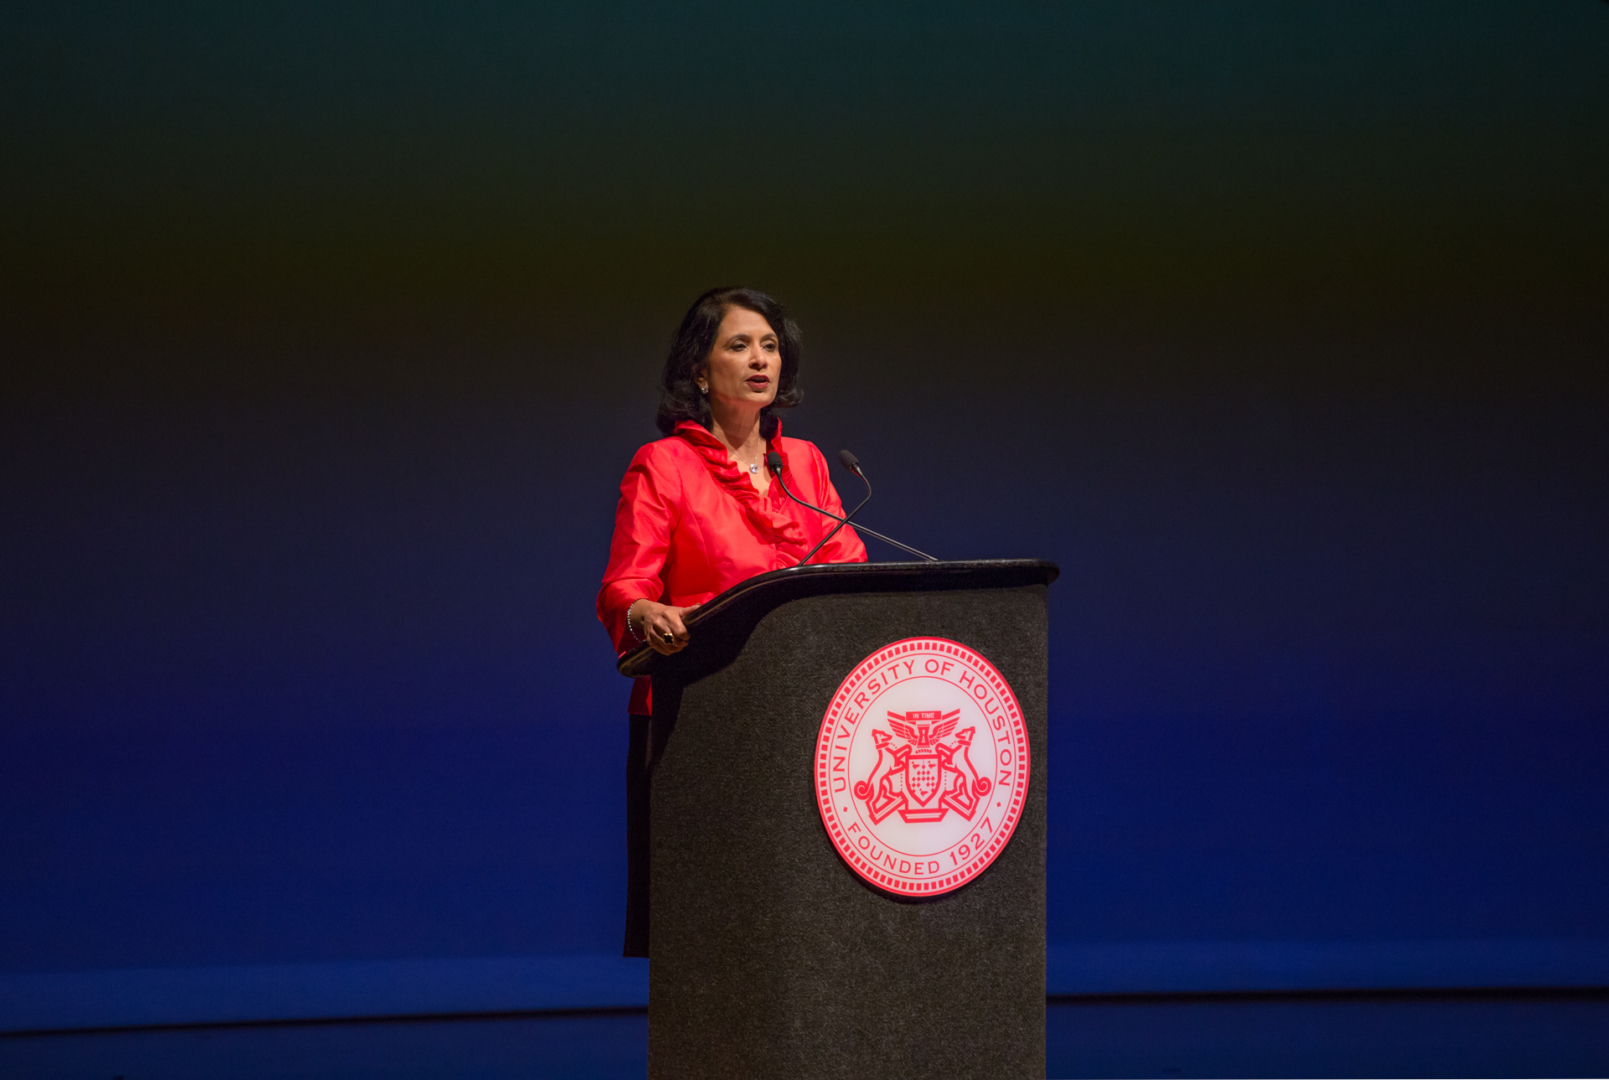 While President Renu Khator announced her long term goal for UH to rank in the top 50 U.S. public institutions, the University has a more narrowed short term goal of jumping to top 75, from their current rank of No. 87. | Trevor Nolley/The Cougar